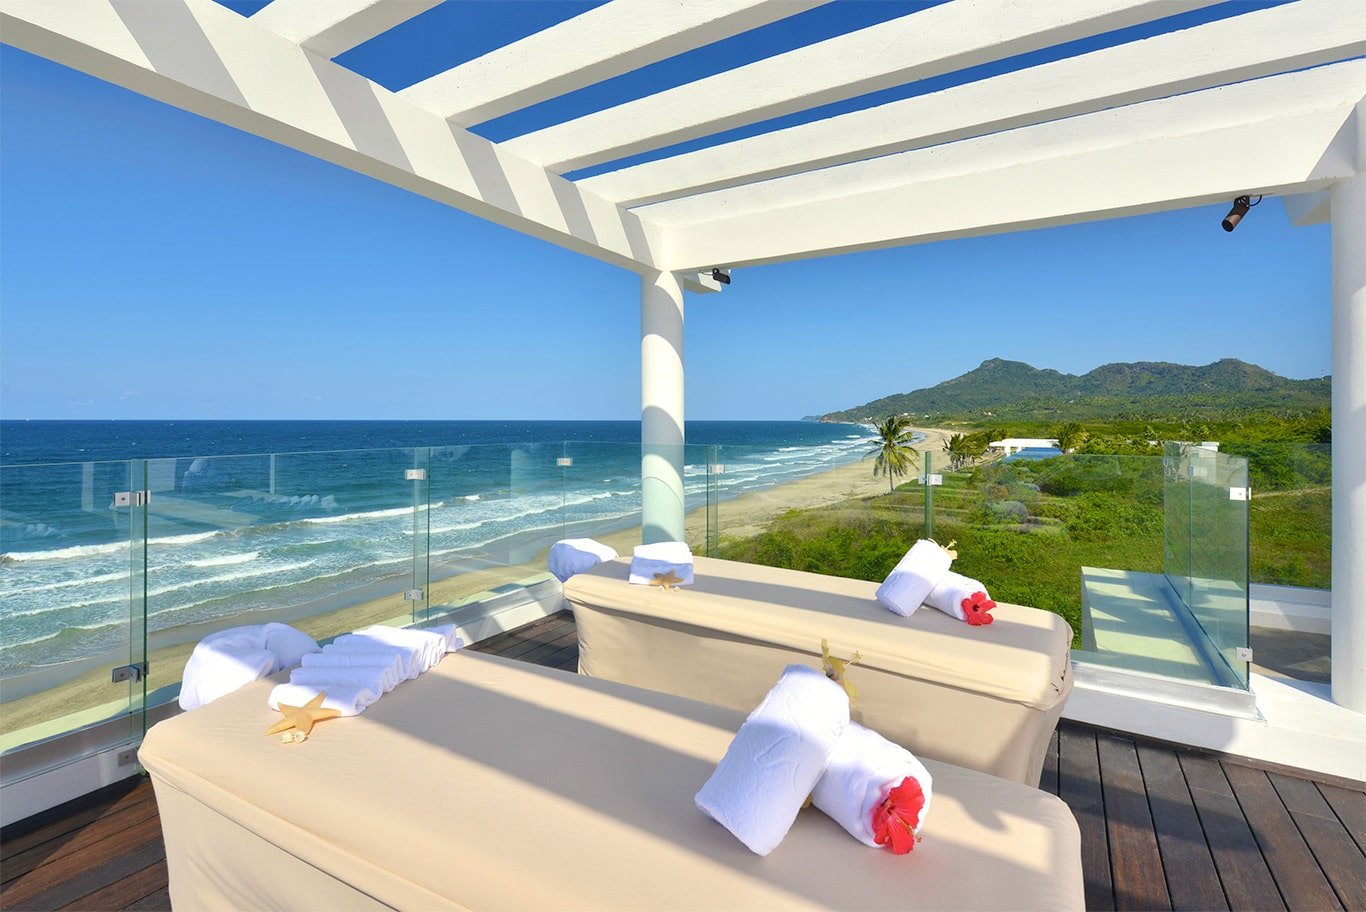 couples massage table set up on the ocean front deck overlooking the ocean